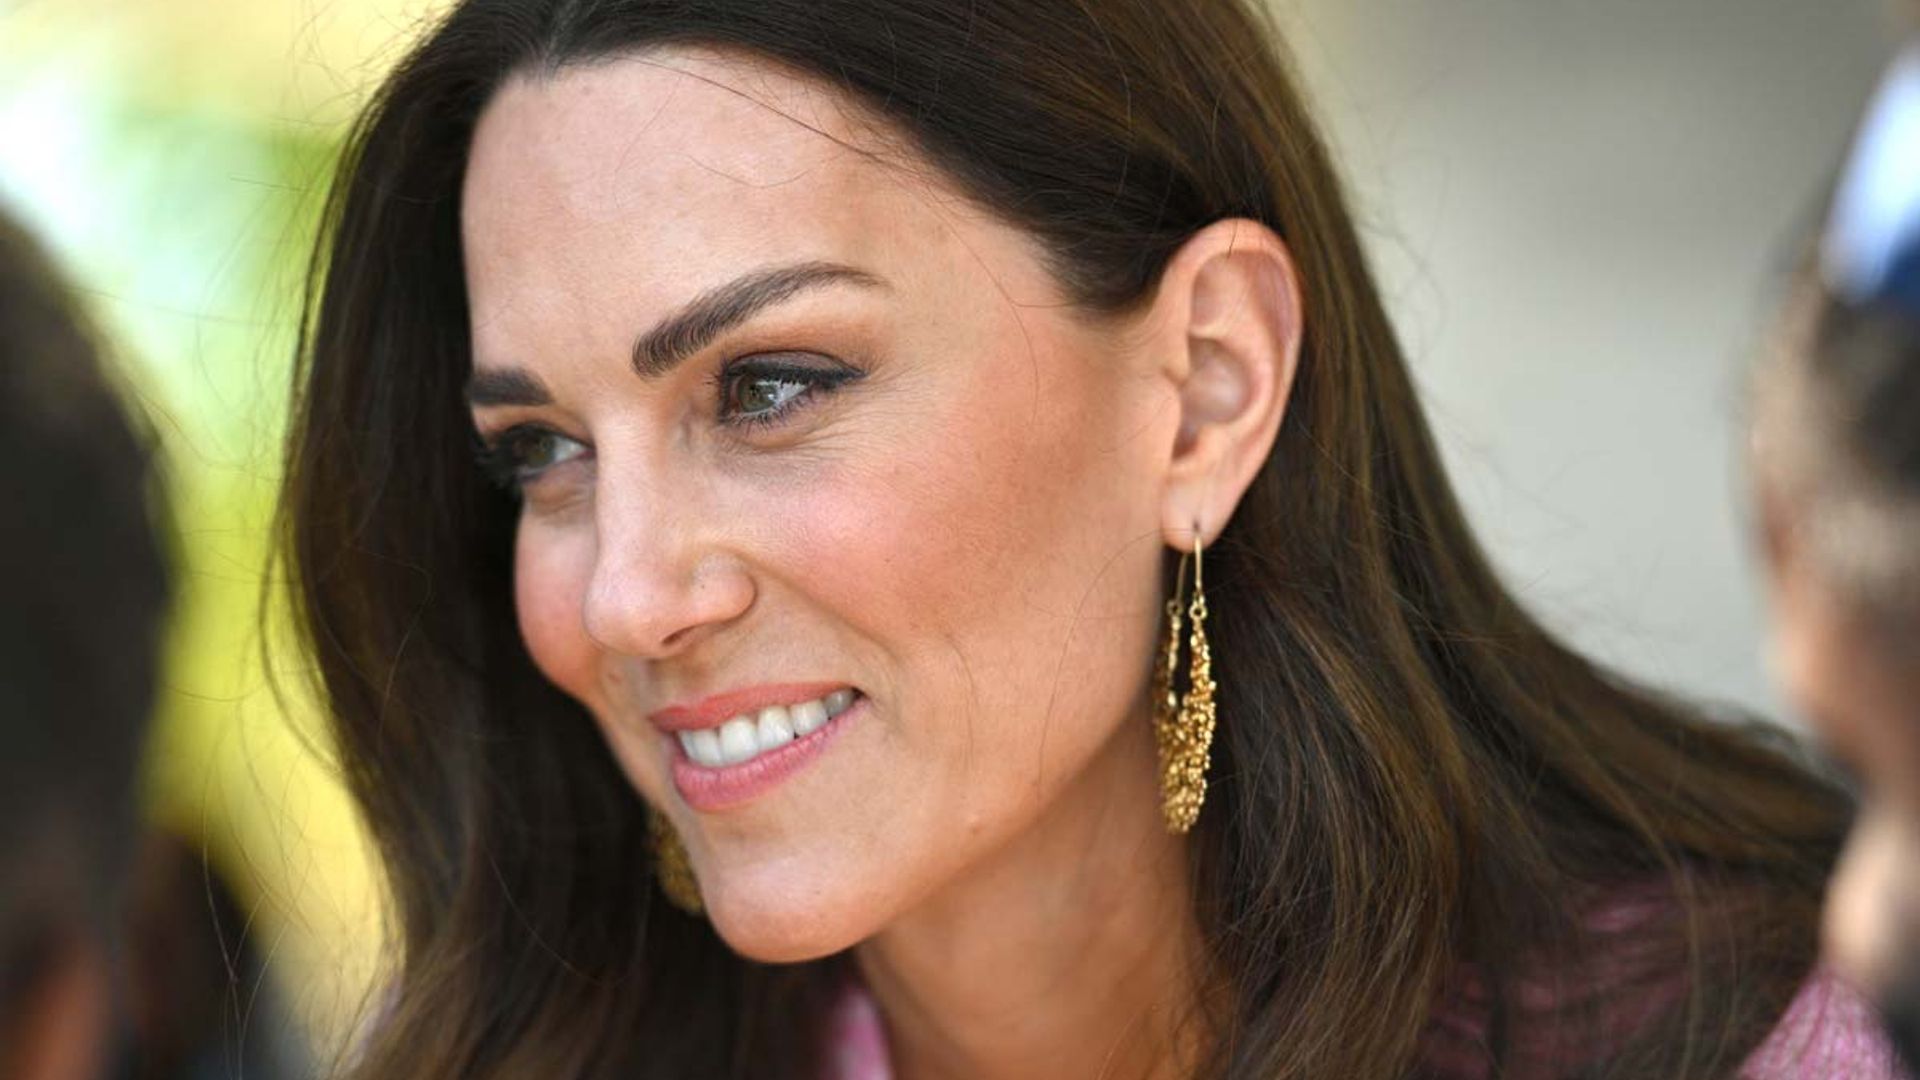 Kate Middleton departs the Bahamas in yellow eighties-inspired dress - but it divides royal fans